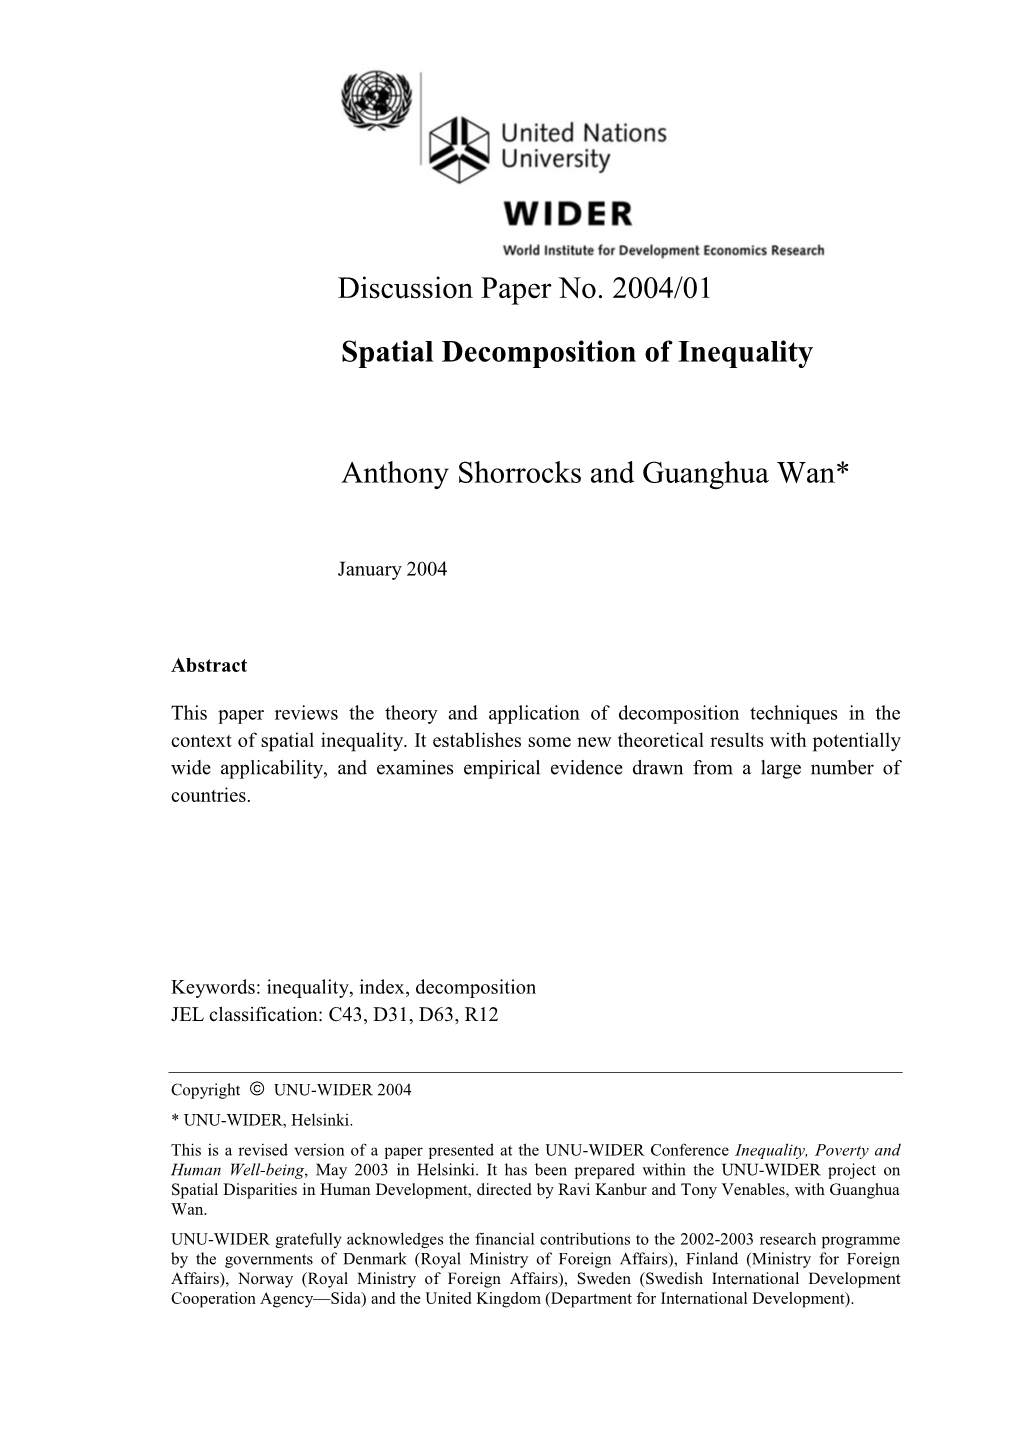 Discussion Paper No. 2004/01 Spatial Decomposition of Inequality